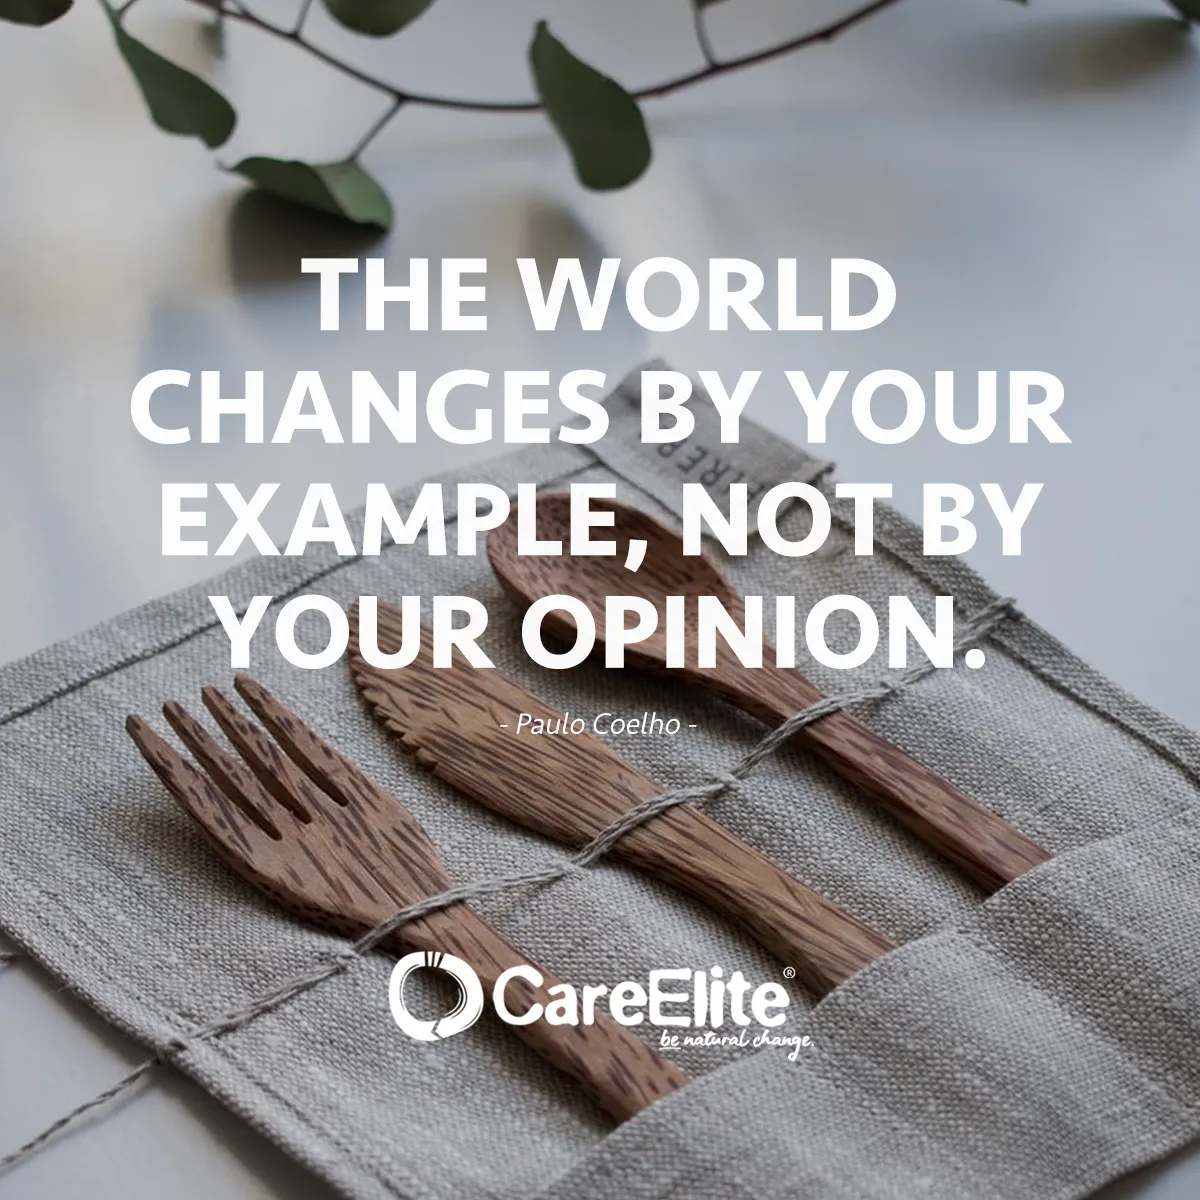 The world changes by your example, not by your opinion. (Quote from Paulo Coelho)